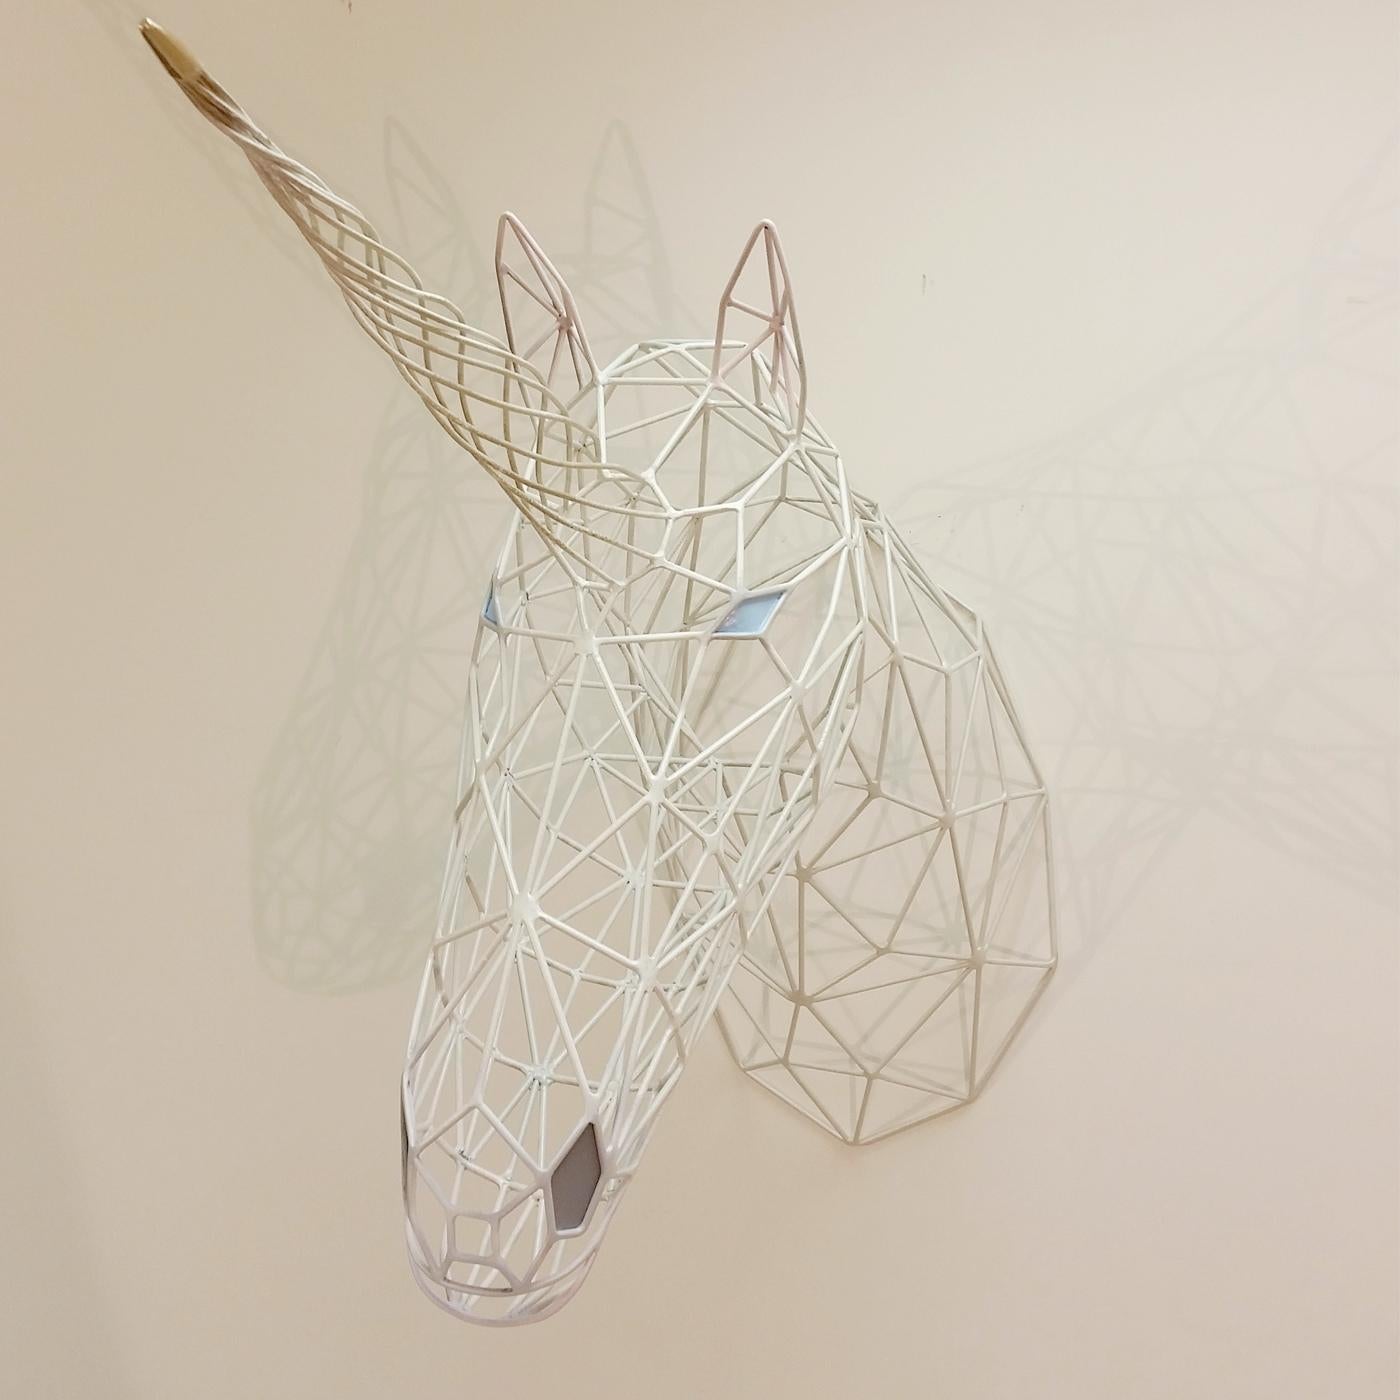 A playful and modern interpretation of the traditional trophy, this sculpture is a stunning work of art, entirely made by hand without the assistance of electronic tools. This elegant piece creates the three-dimensional Silhouette of a unicorn head